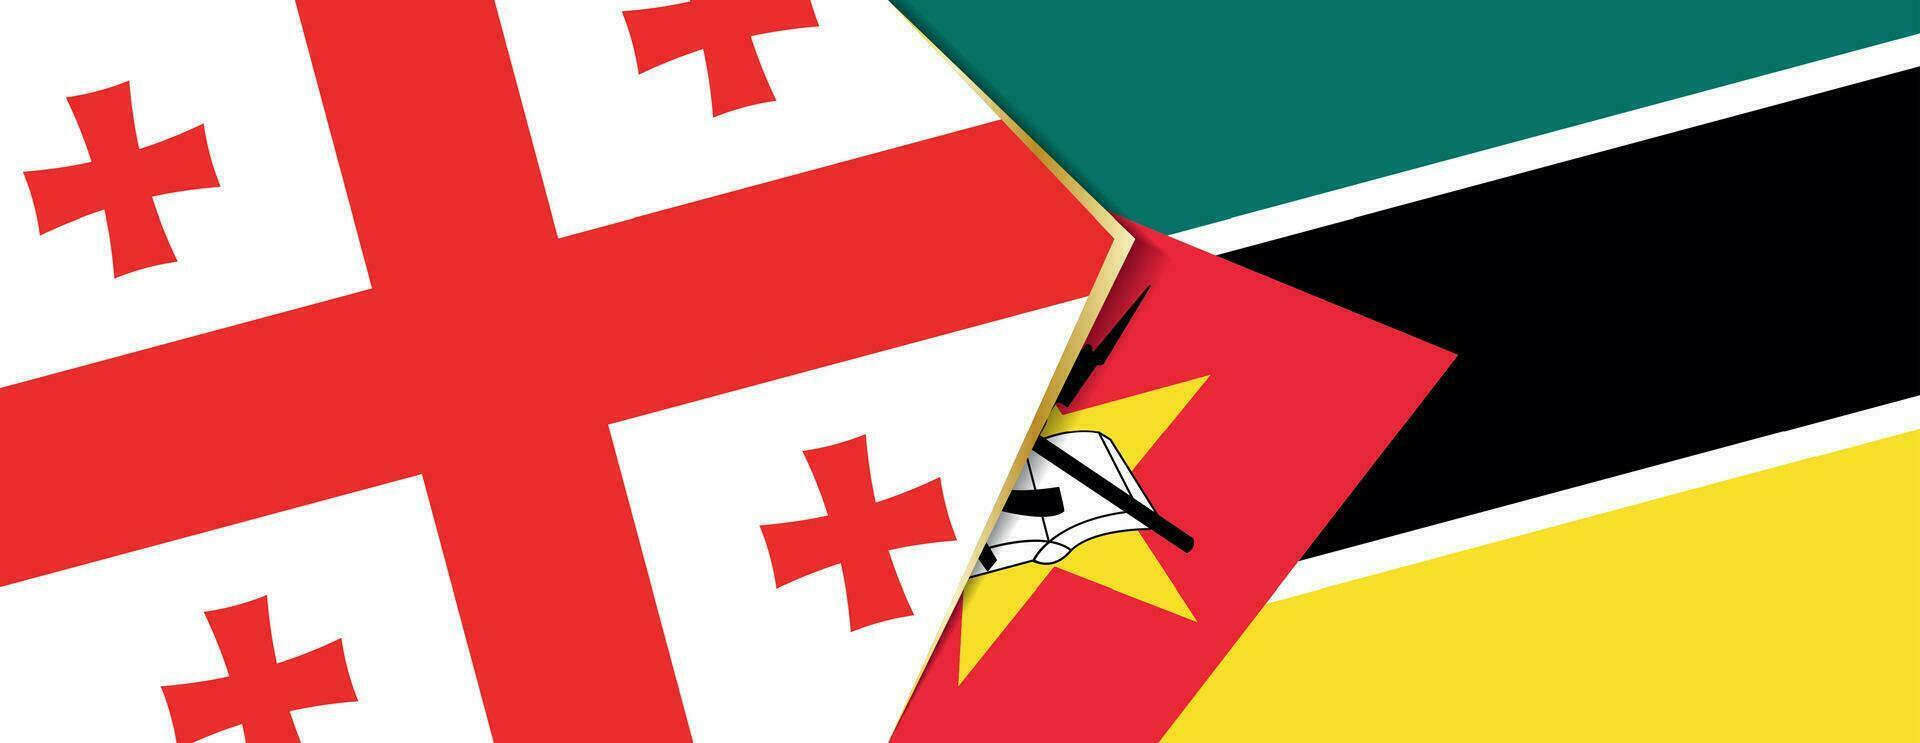 Georgia and Mozambique flags, two vector flags.